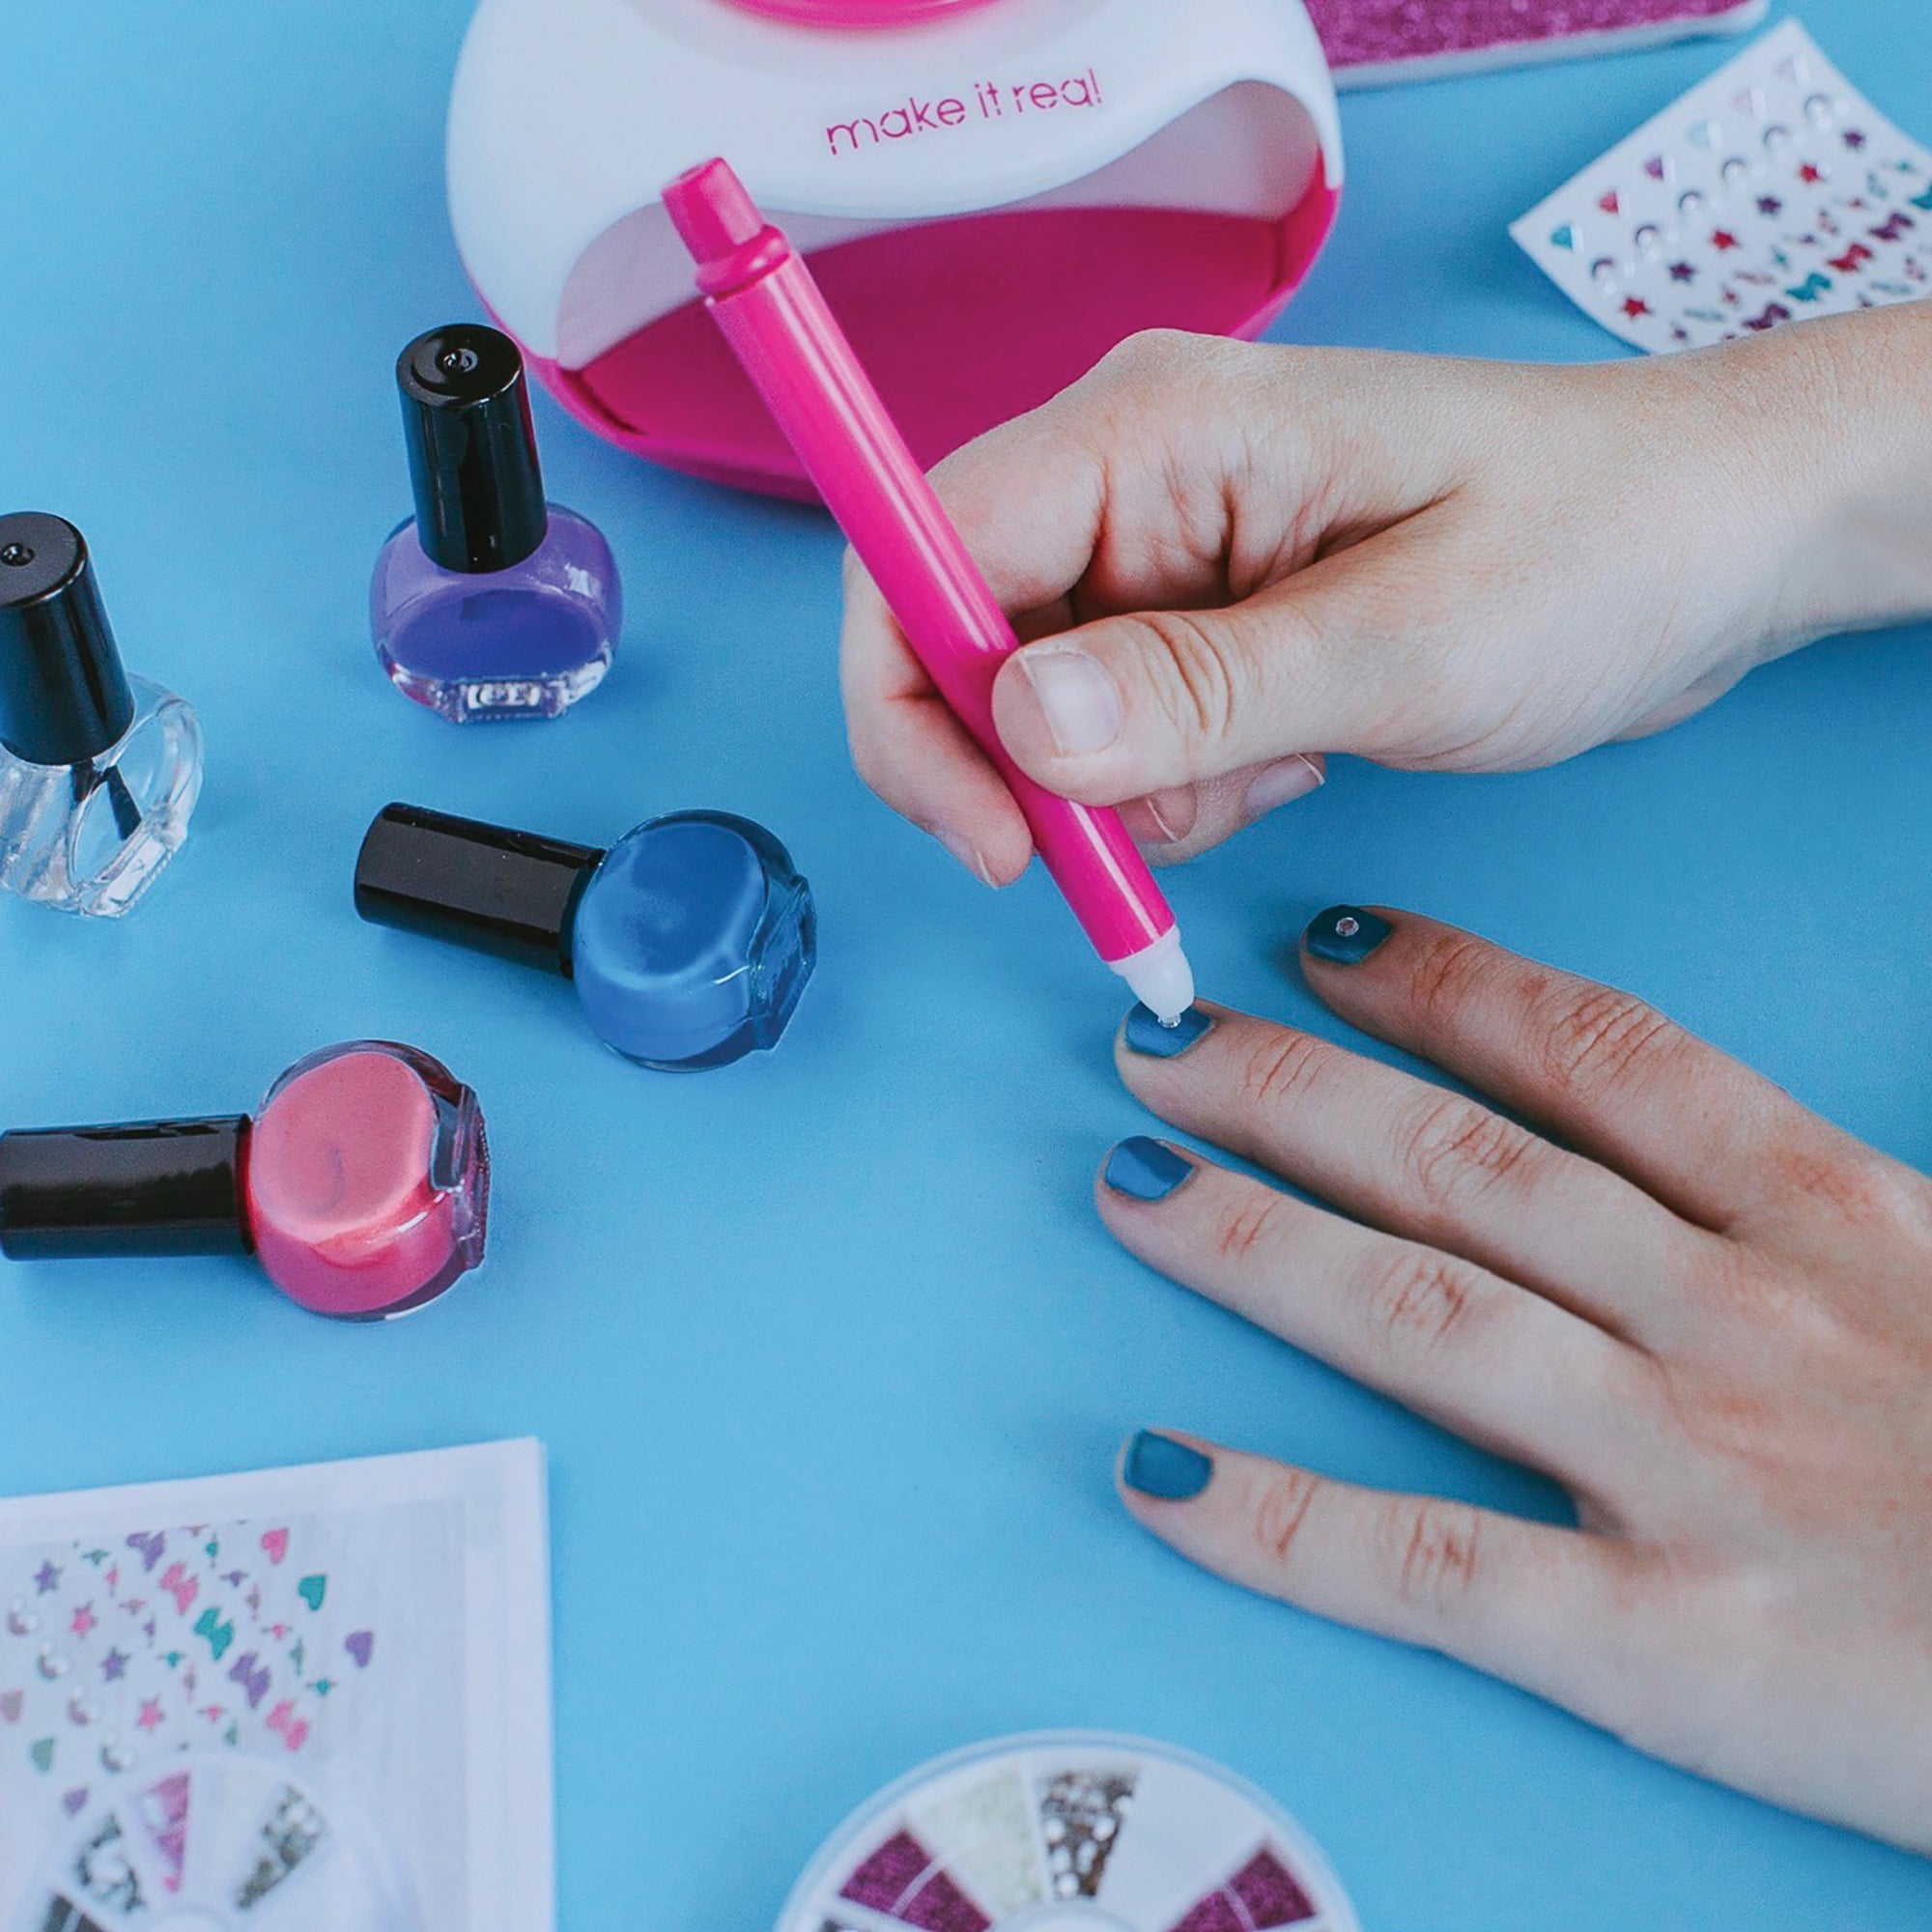 Make It Real Launches No-Mess Glitter Nail Studio - The Toy Book